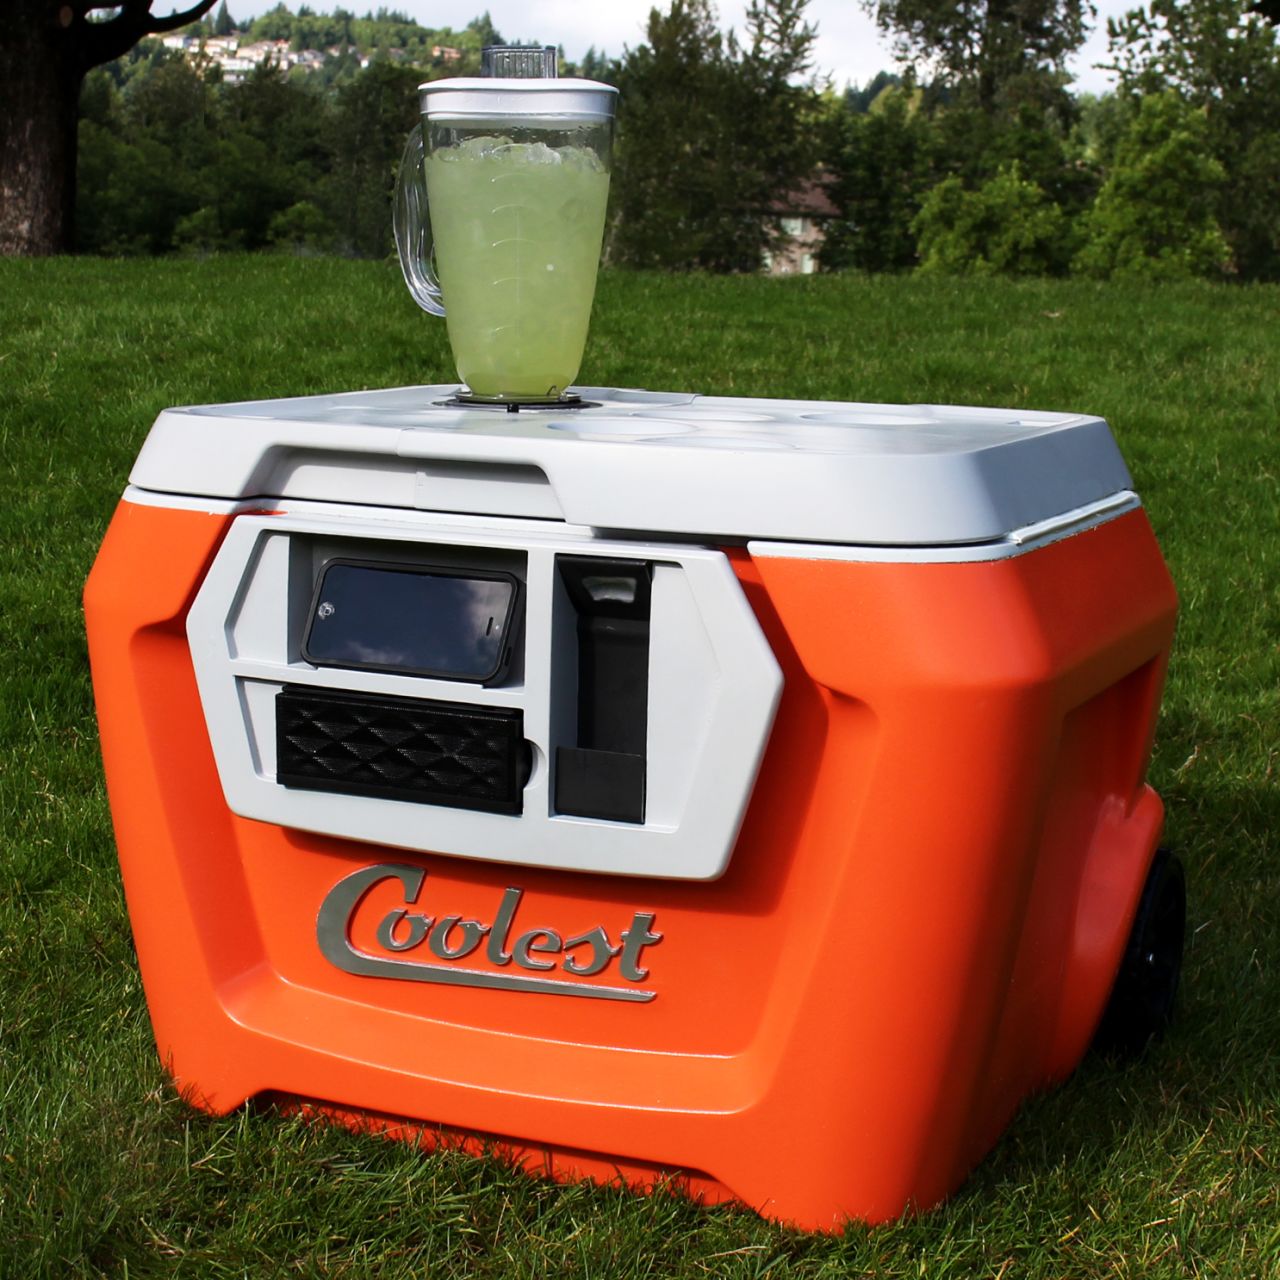 <strong>Coolest: $8.2 million pledged of $50,000 goal, 41,675 backers --</strong> Described as a "portable party disguised as a cooler," the Coolest comes equipped with a built-in ice crushing blender, a waterproof bluetooth speaker and a USB charger. The campaign will run until August 30. 